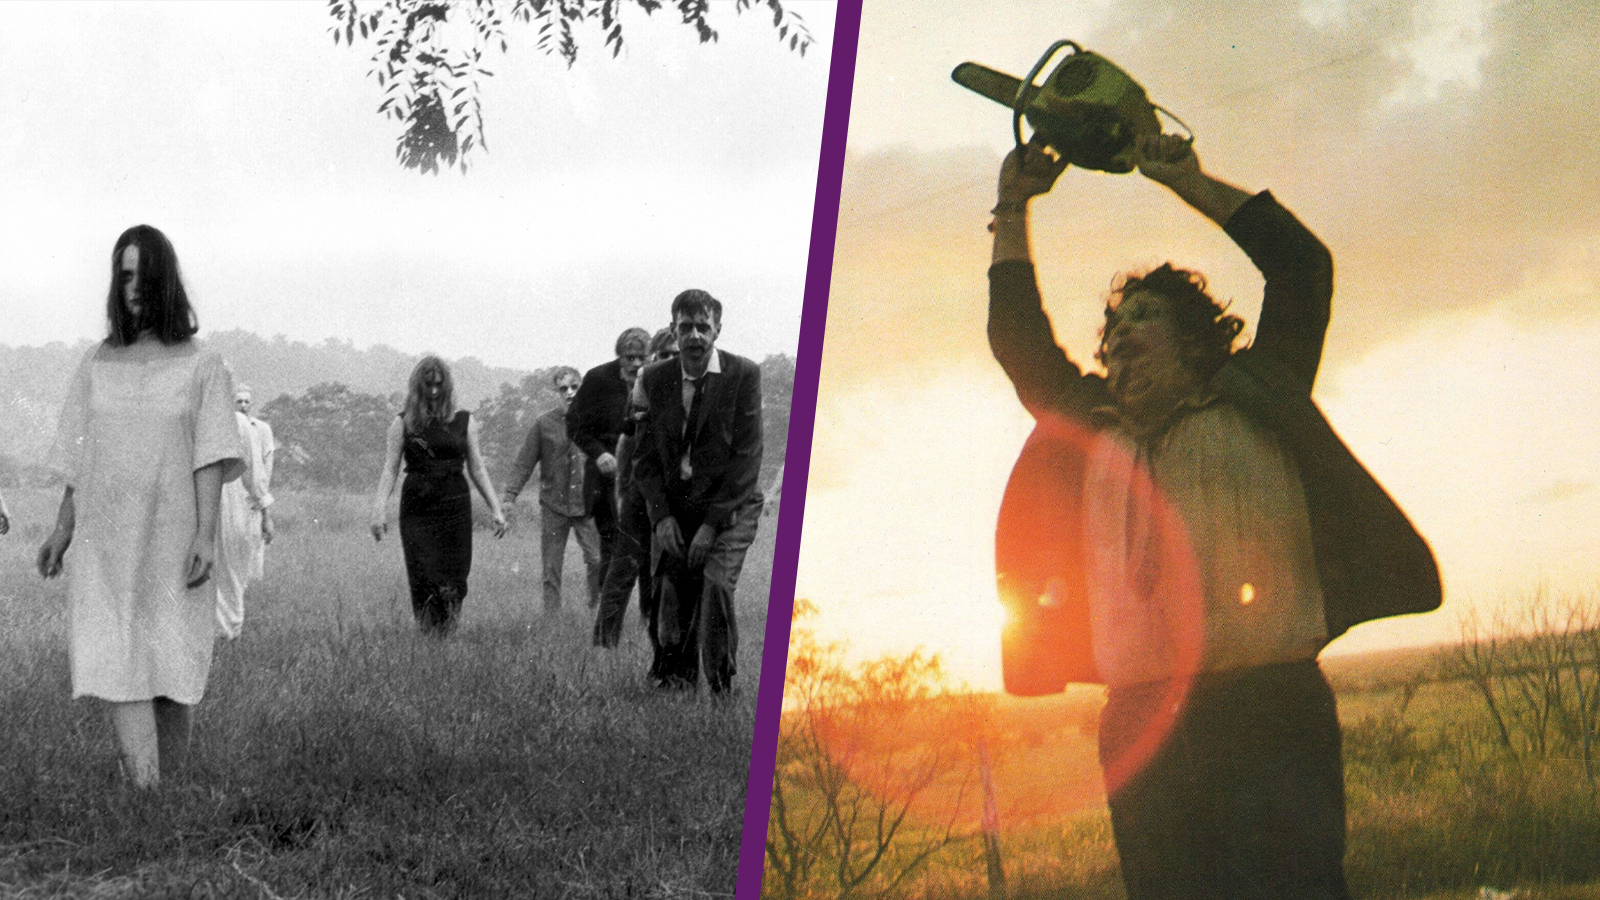 Night of the Living Dead and The Texas Chain Saw Massacre at Medfield State Hospital